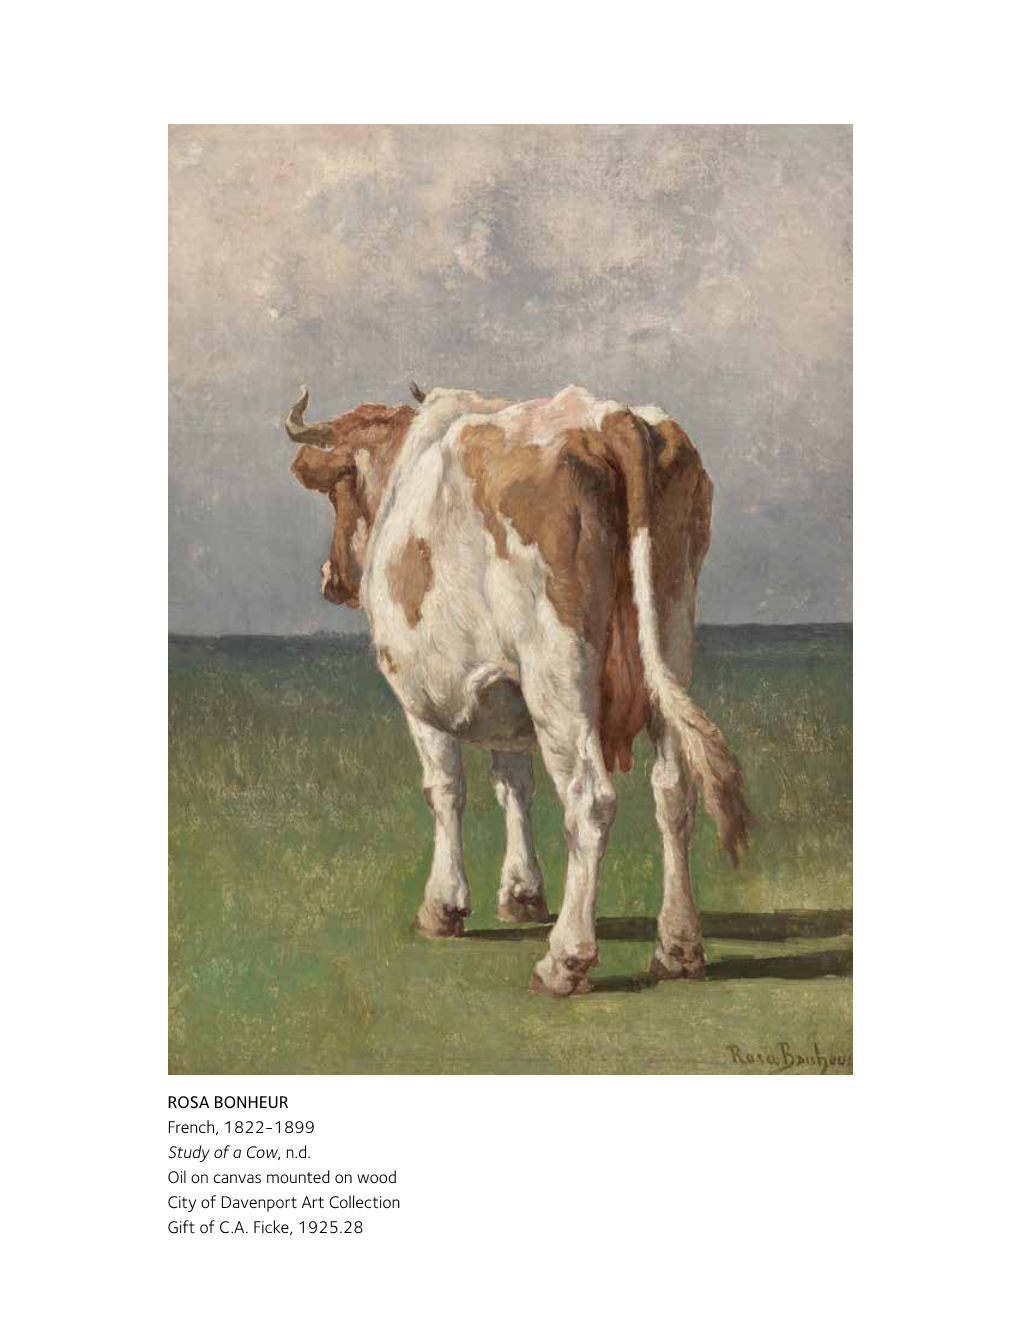 ROSA BONHEUR French, 1822-1899 Study of a Cow, N.D